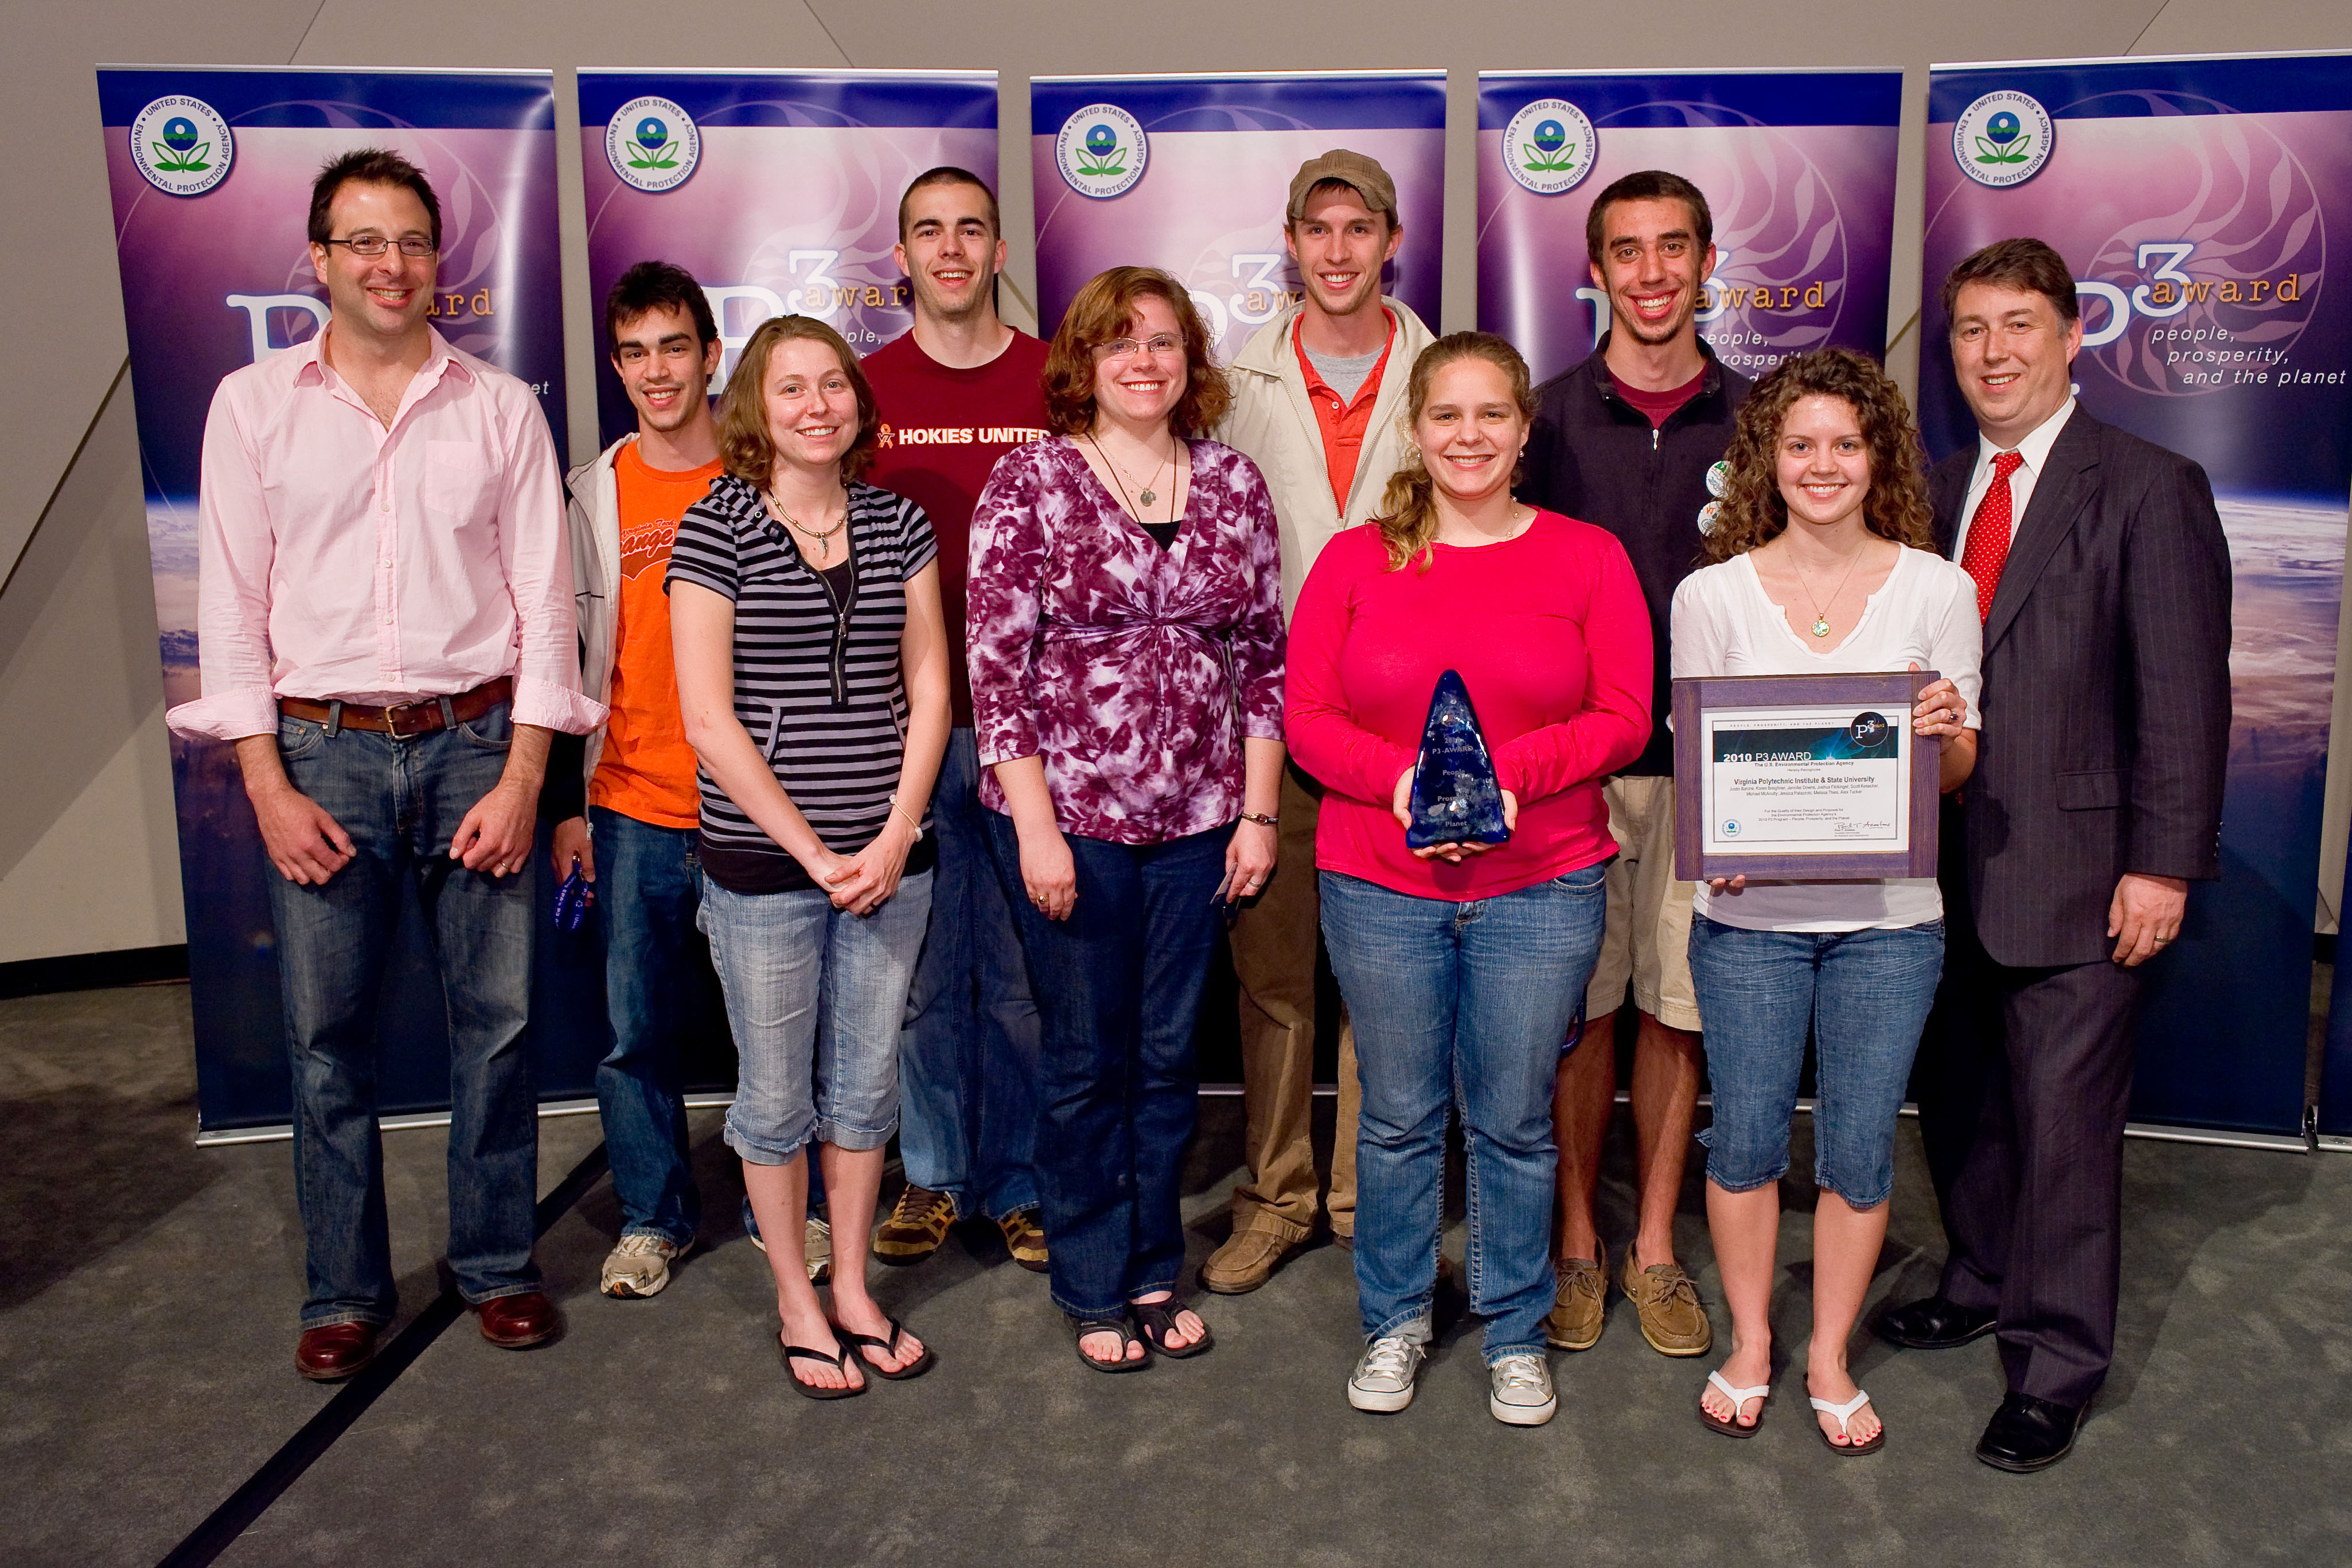 Front row, from left to right: Jessica Palazzolo, Melissa Thies, Koren Breighner, and Jennifer Downs. Back row: faculty advisor Justin Barone, Michael McAnulty, Alex Tucker, Scott Kesecker, Joshua Flickinger, and Paul Anastas, assistant administrator for EPA's Office of Research and Development and the agency's science advisor.